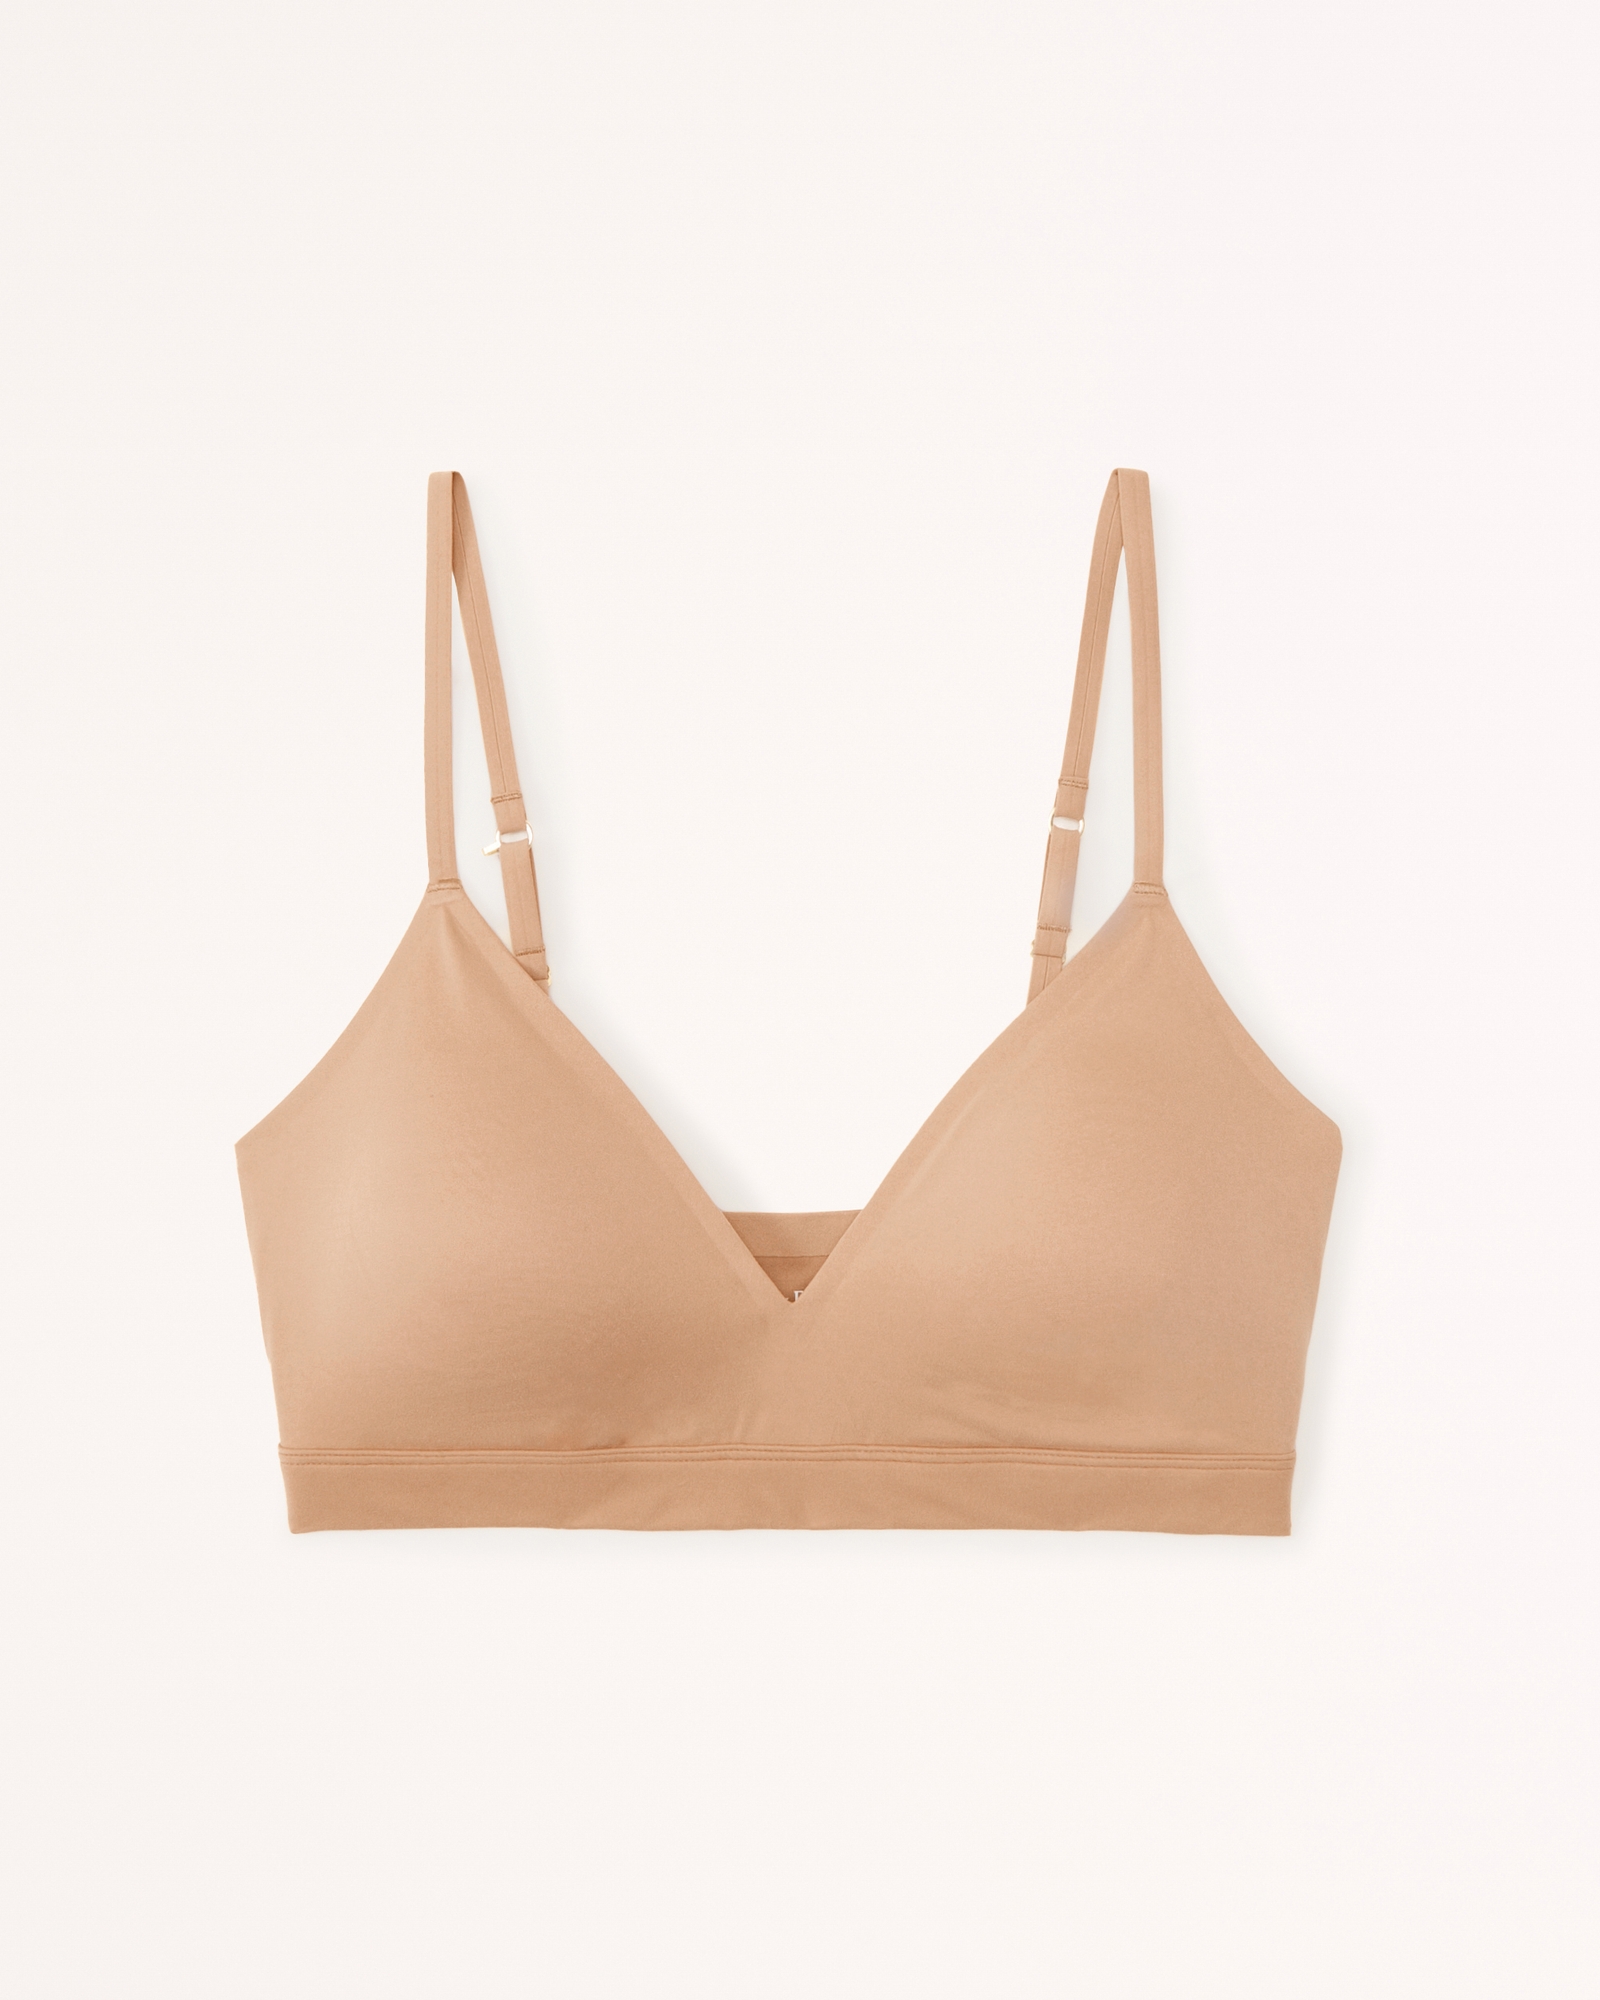 Buy Gilly Hicks Sport Bras online - Women - 2 products